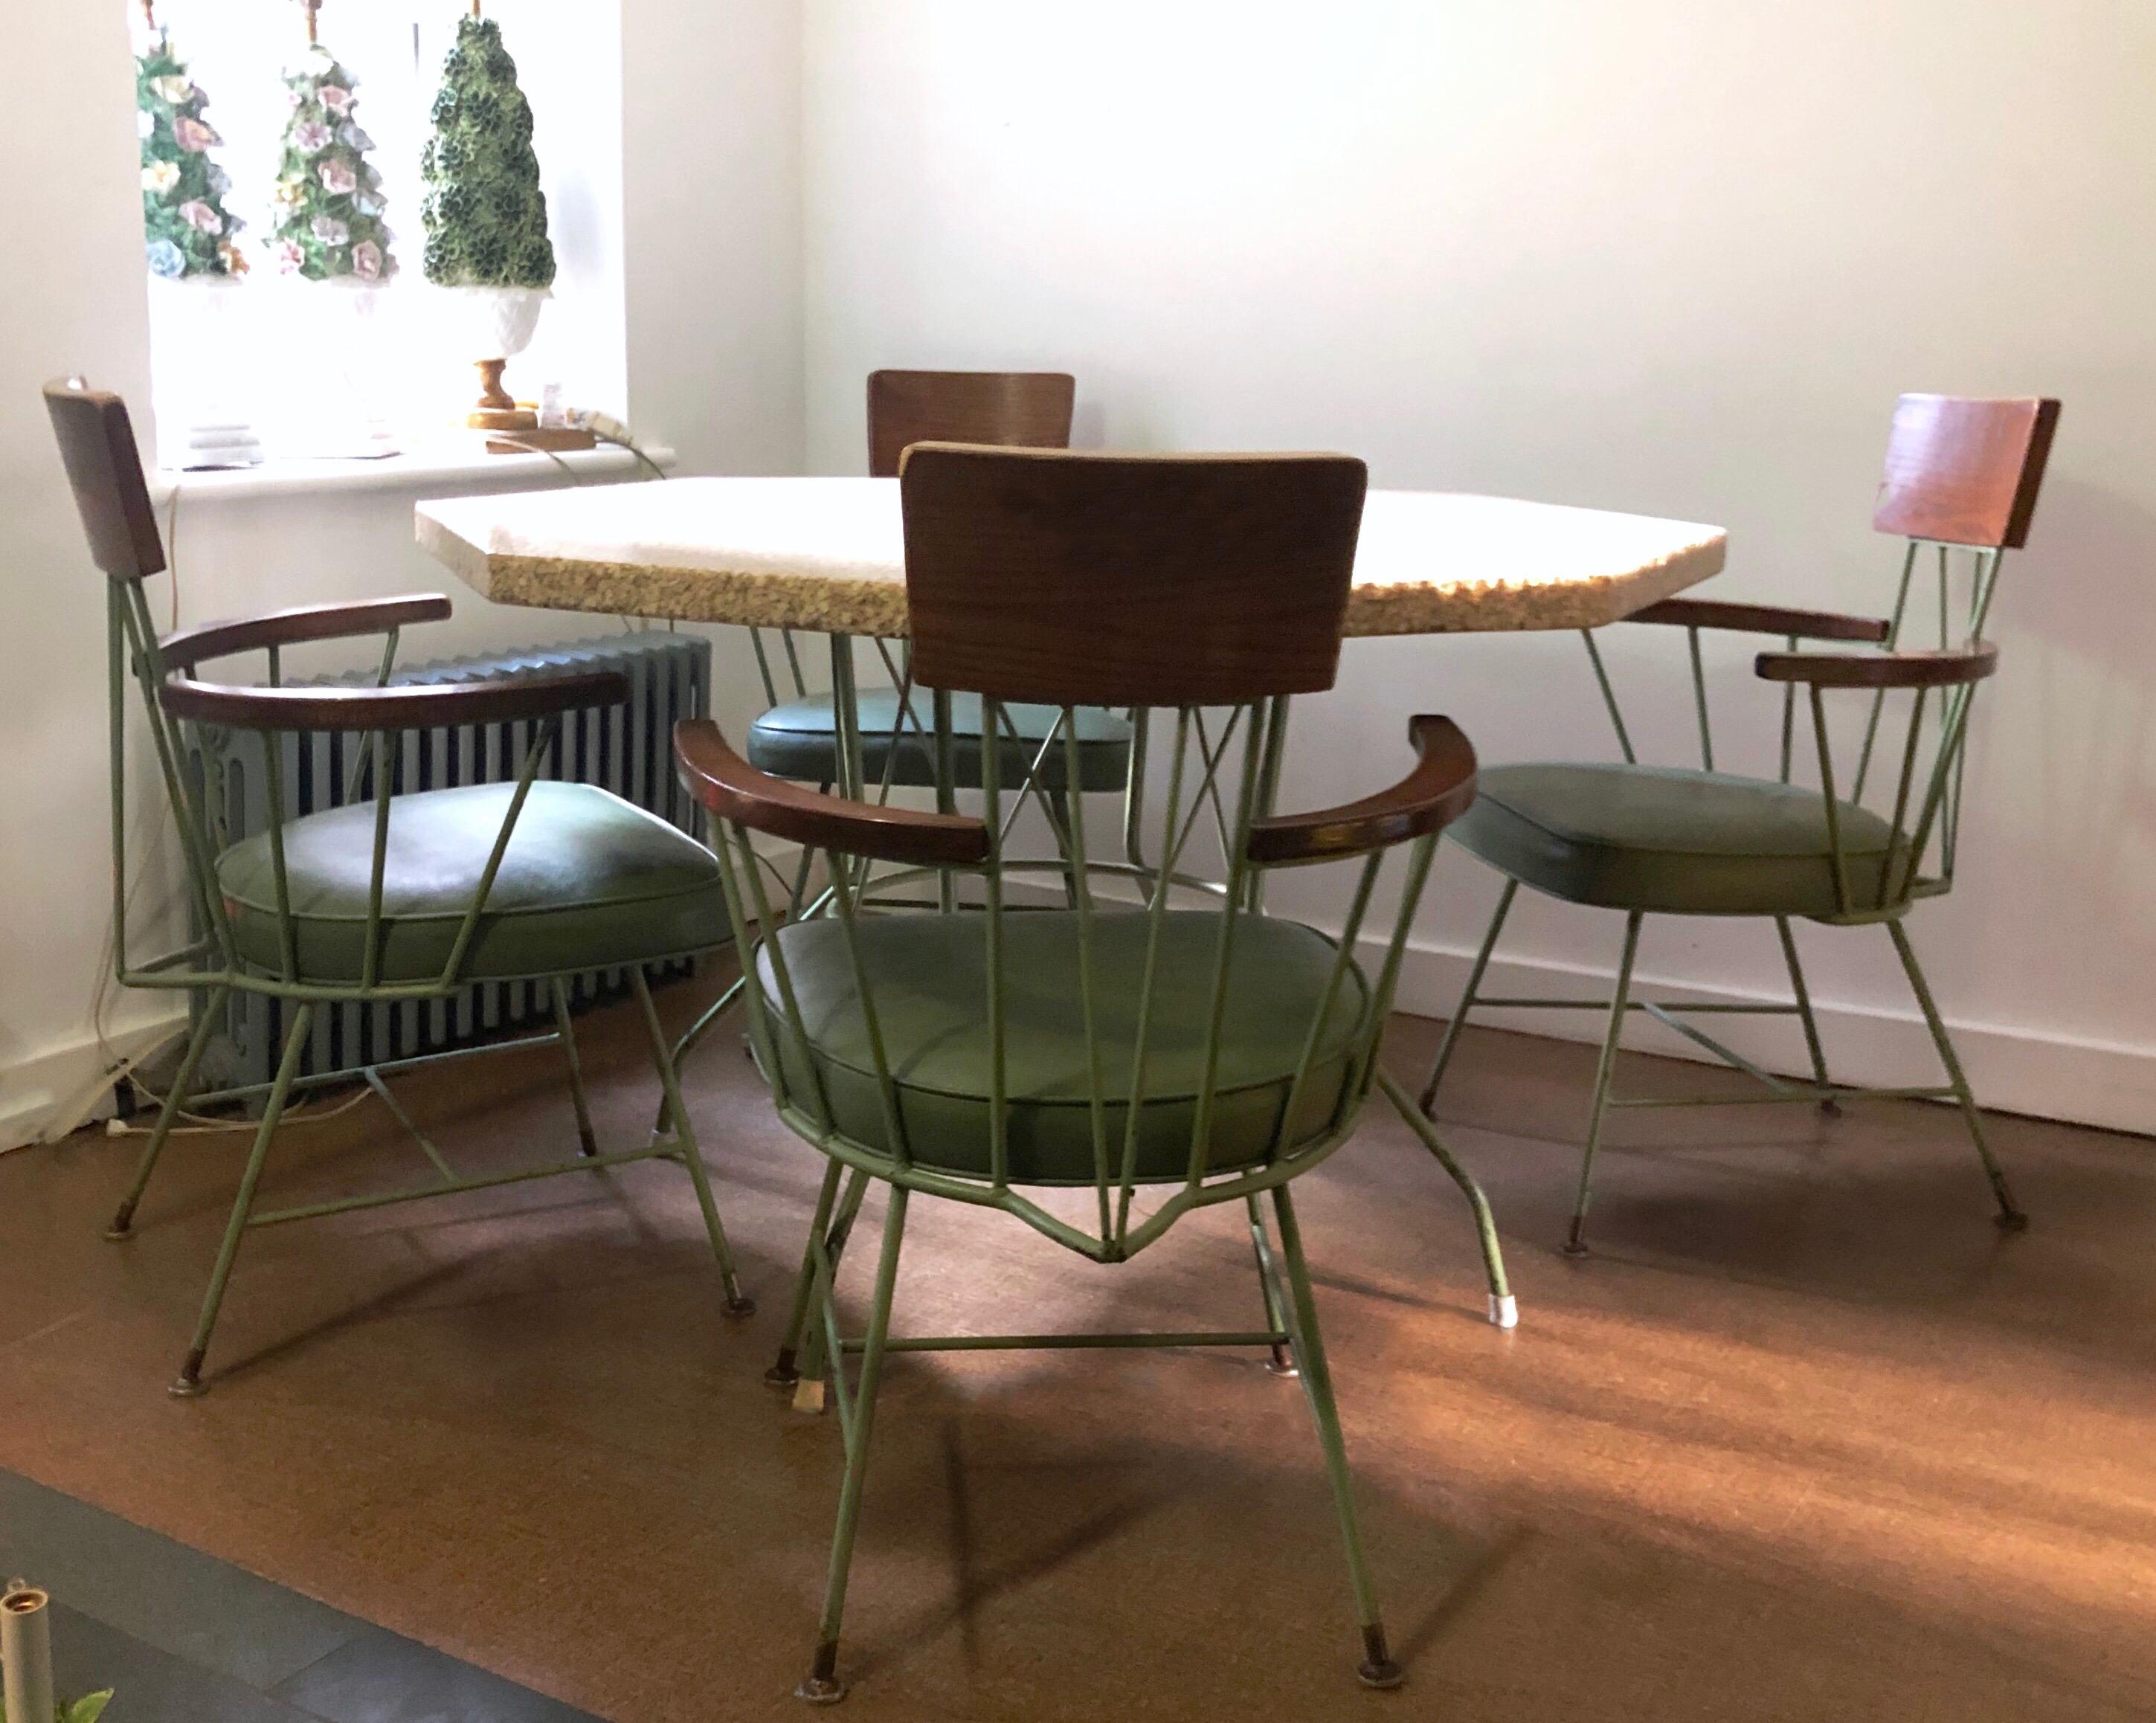 Mid-Century Richard McCarthy Americana Iron Wood & Pebble Dining Set 4 armchairs.

Vintage green wrought iron and ash wood pebble-top dinette / kitchenette set for four.

Mid-Century Modern dining suite consisting of a table and four chairs. The